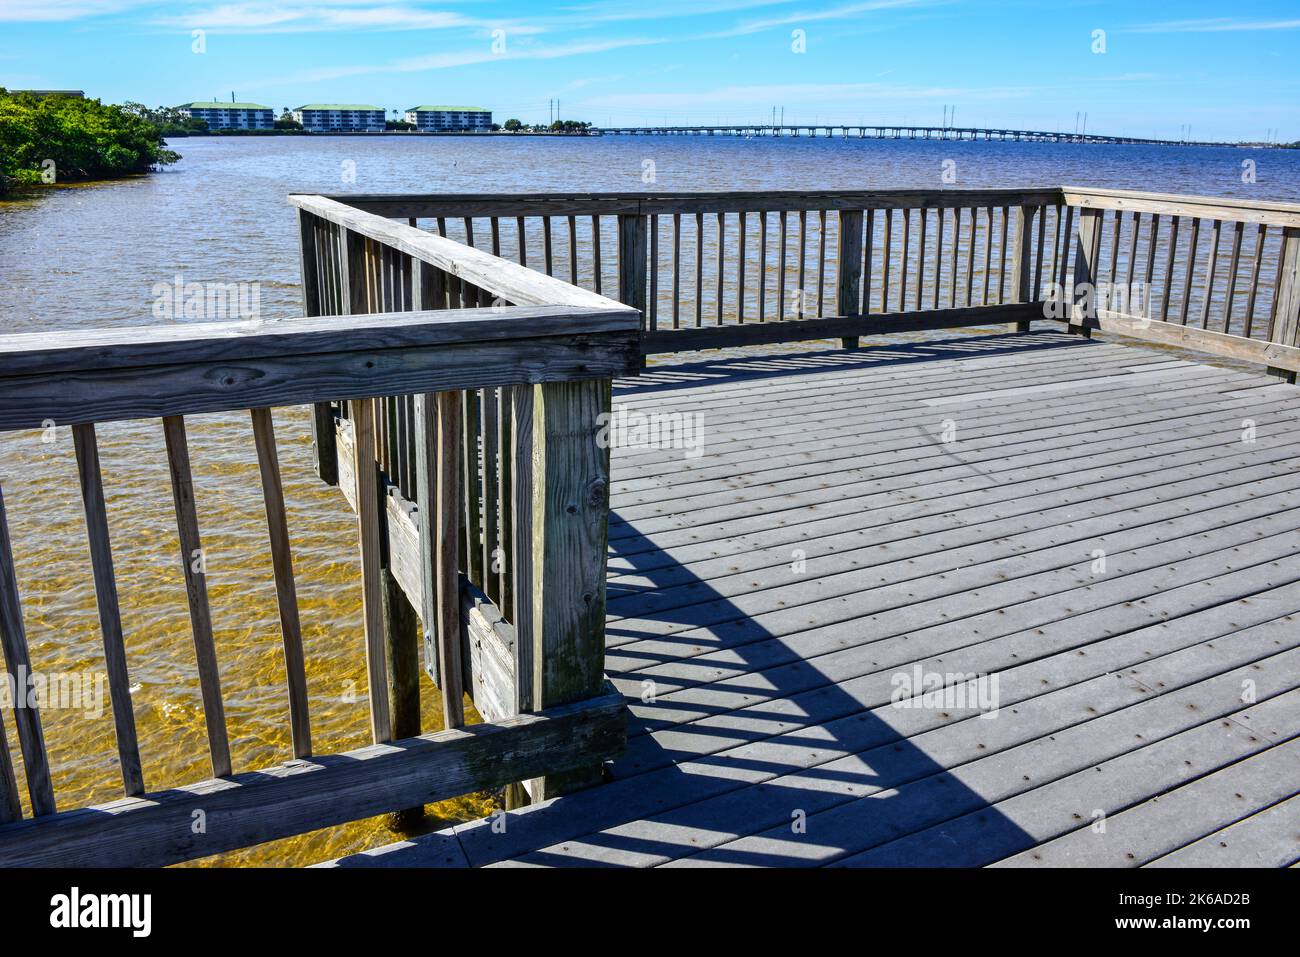 Distant View of the Gilchrist Bridge crossing the Peace River between Port Charlotte and Punta Gorda, Florida from a recreational path with observatio Stock Photo